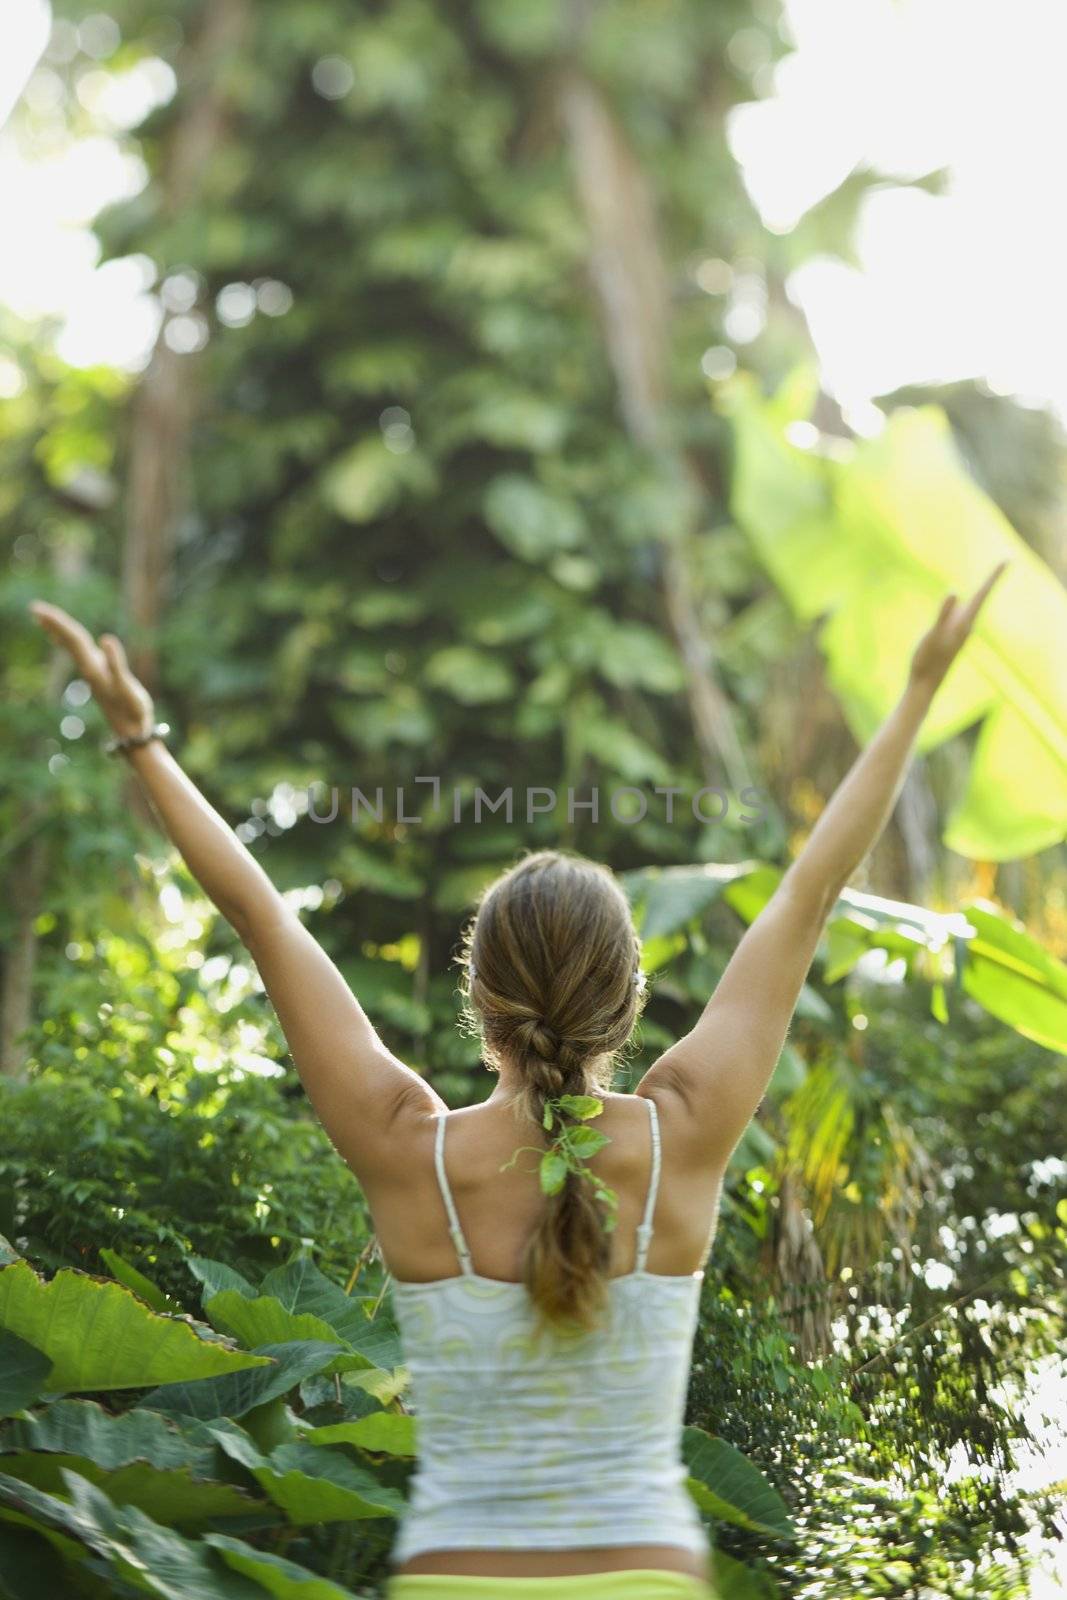 Rear view of Caucasian mid-adult woman holding arms out in yoga position.